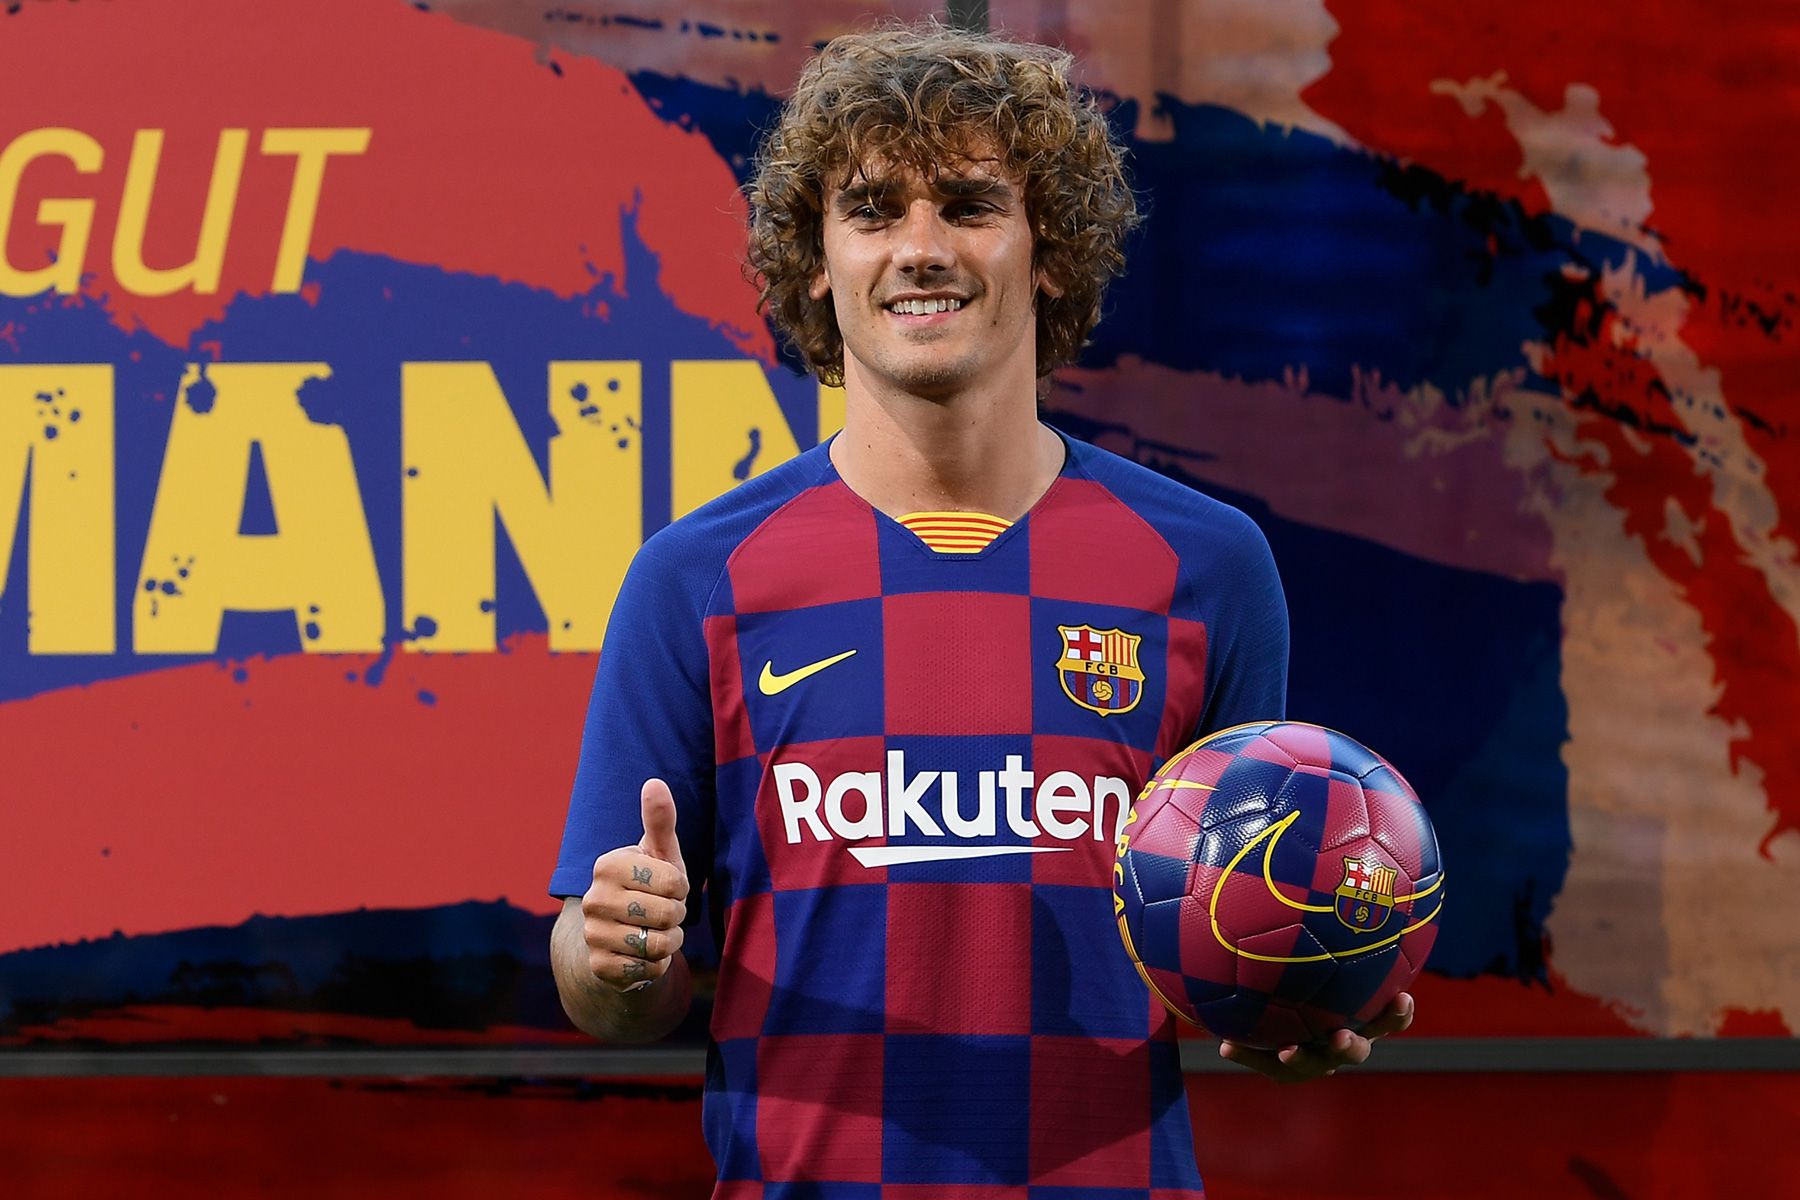 Griezmann In his presentation with the Barça